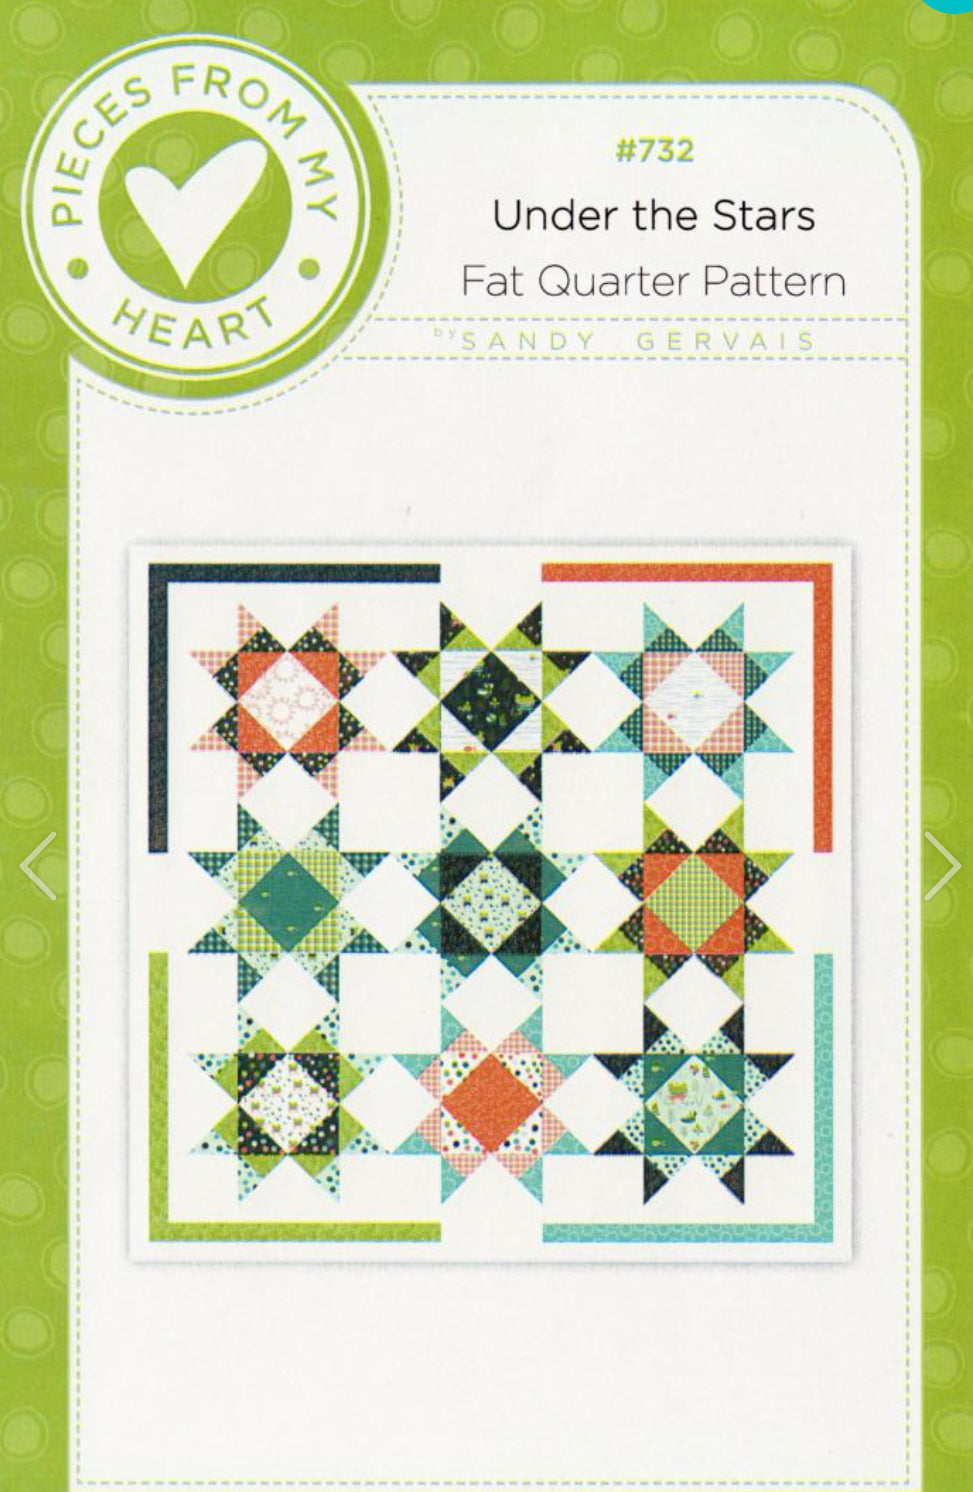 Under the Stars Quilt Pattern by Sandy Gervais